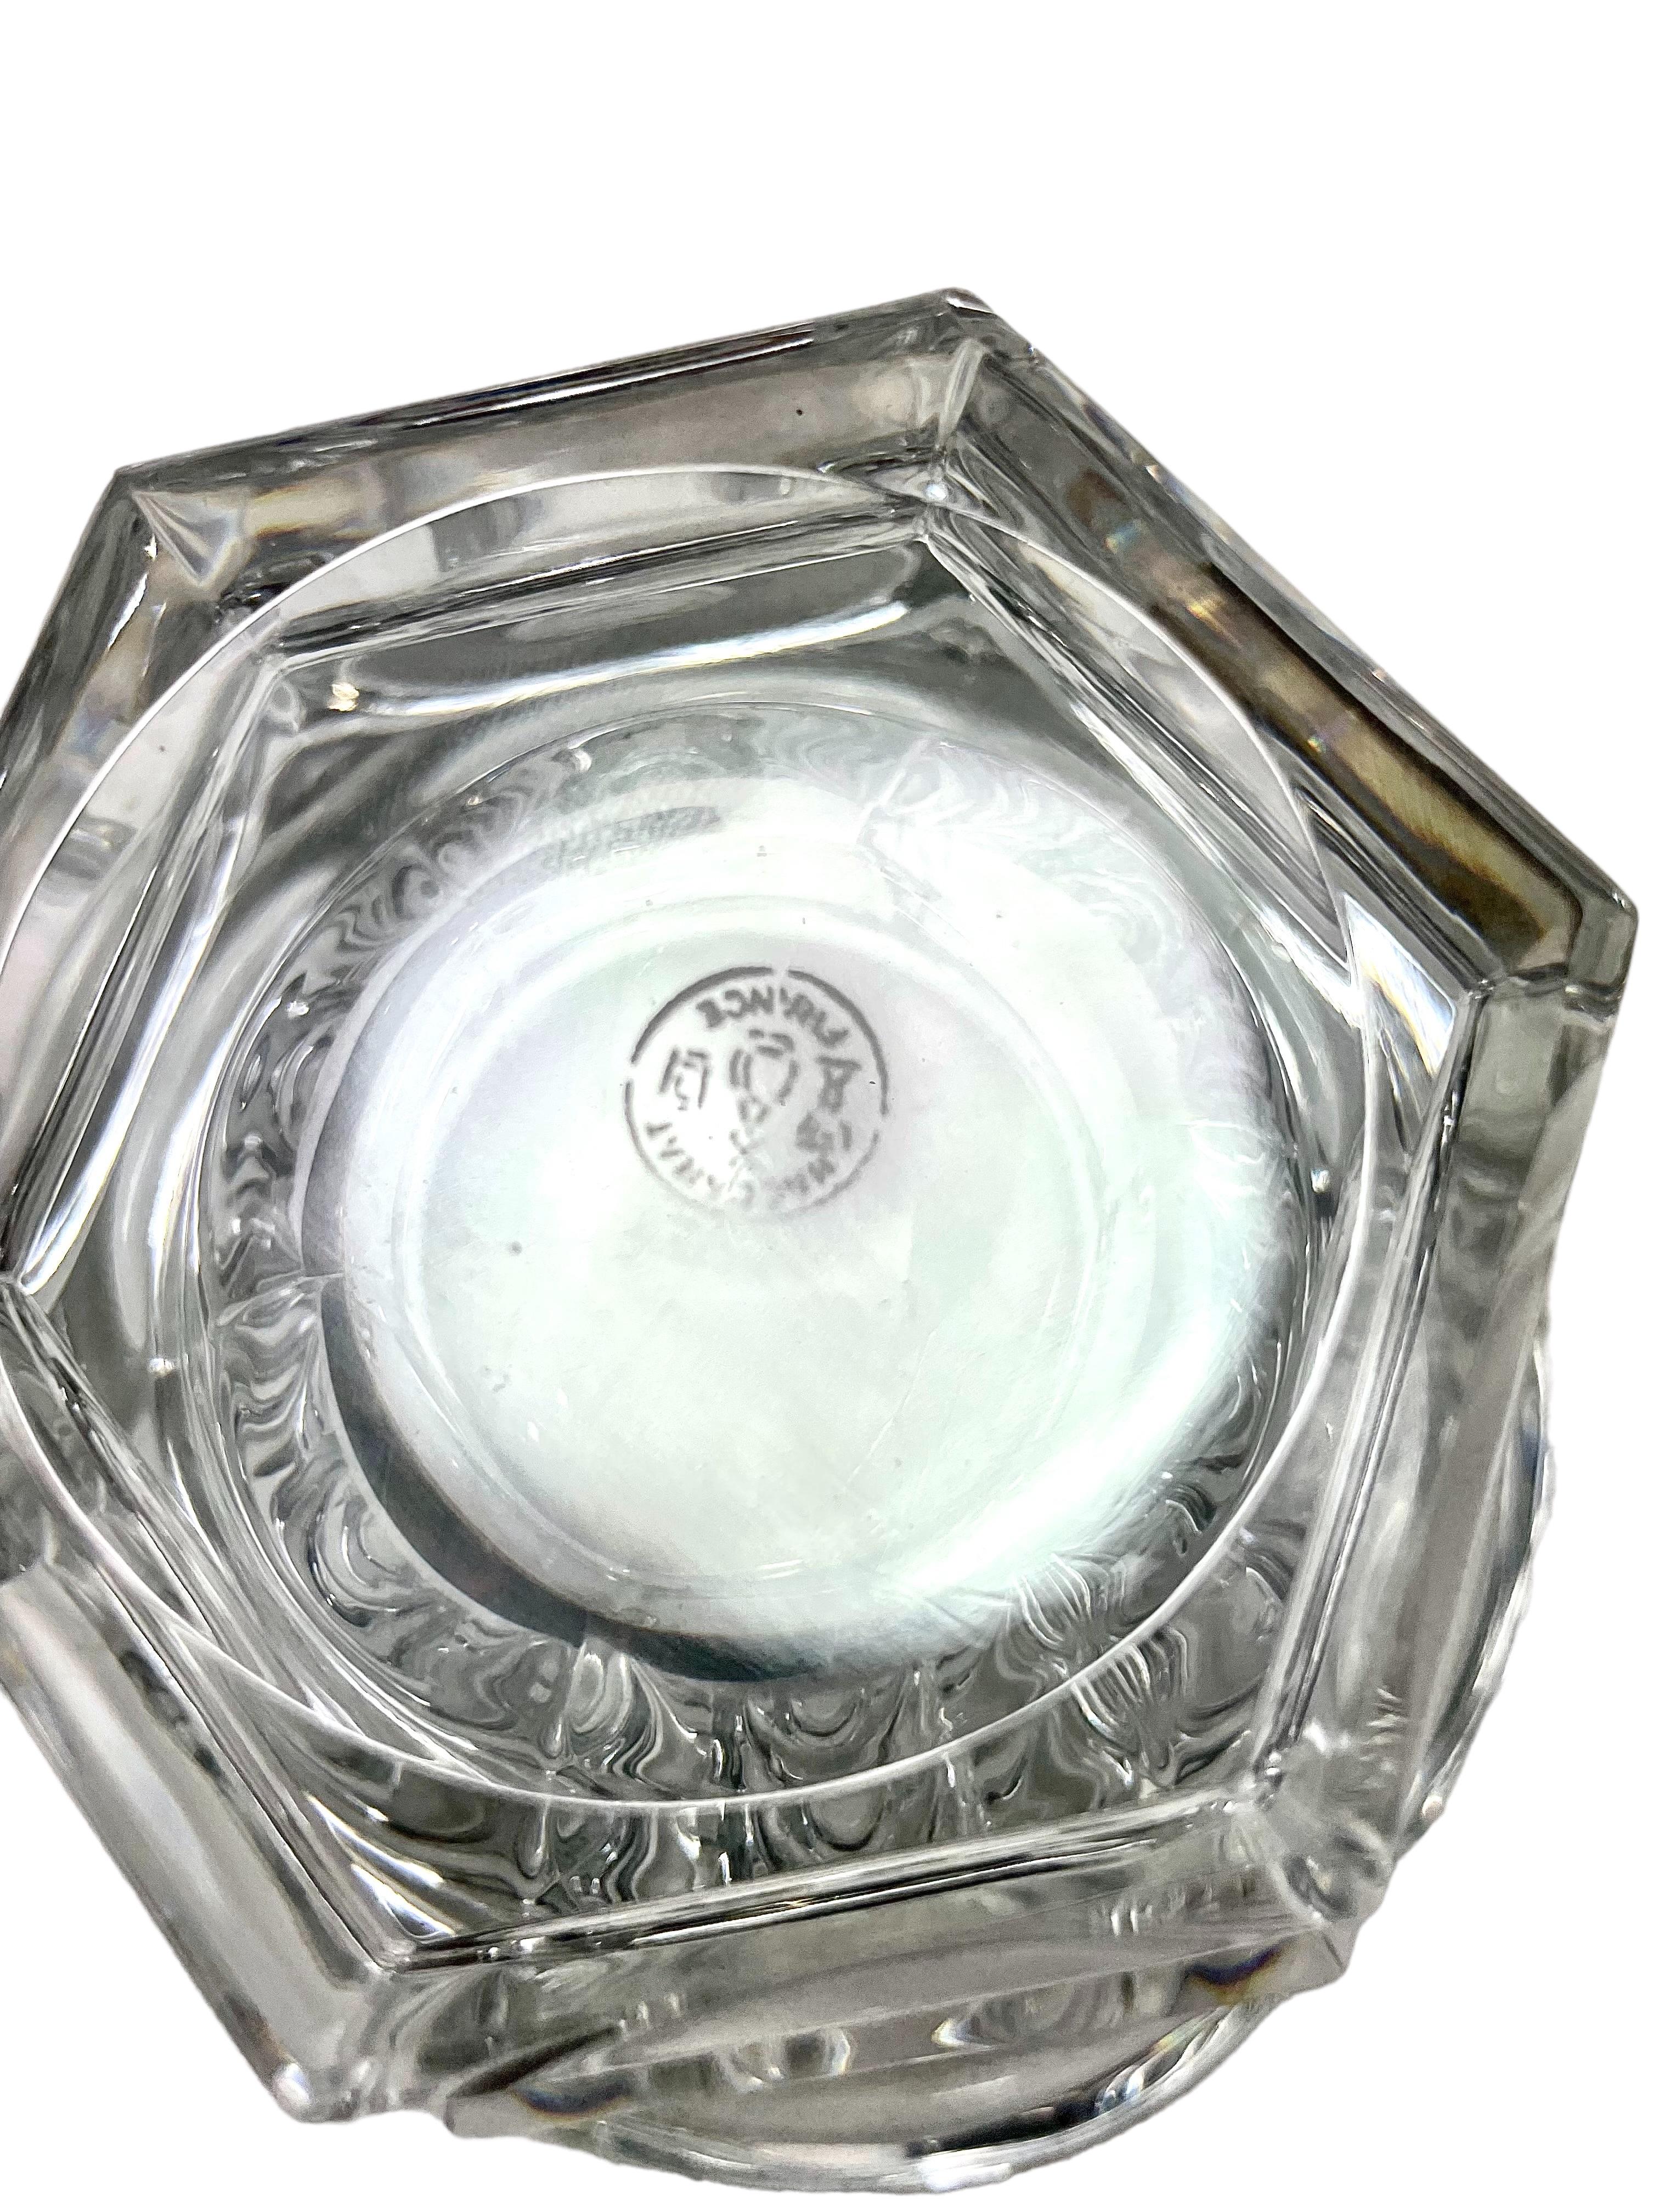 French Baccarat Crystal Bonbonnière, or Sweets Dish with Fitted Lid